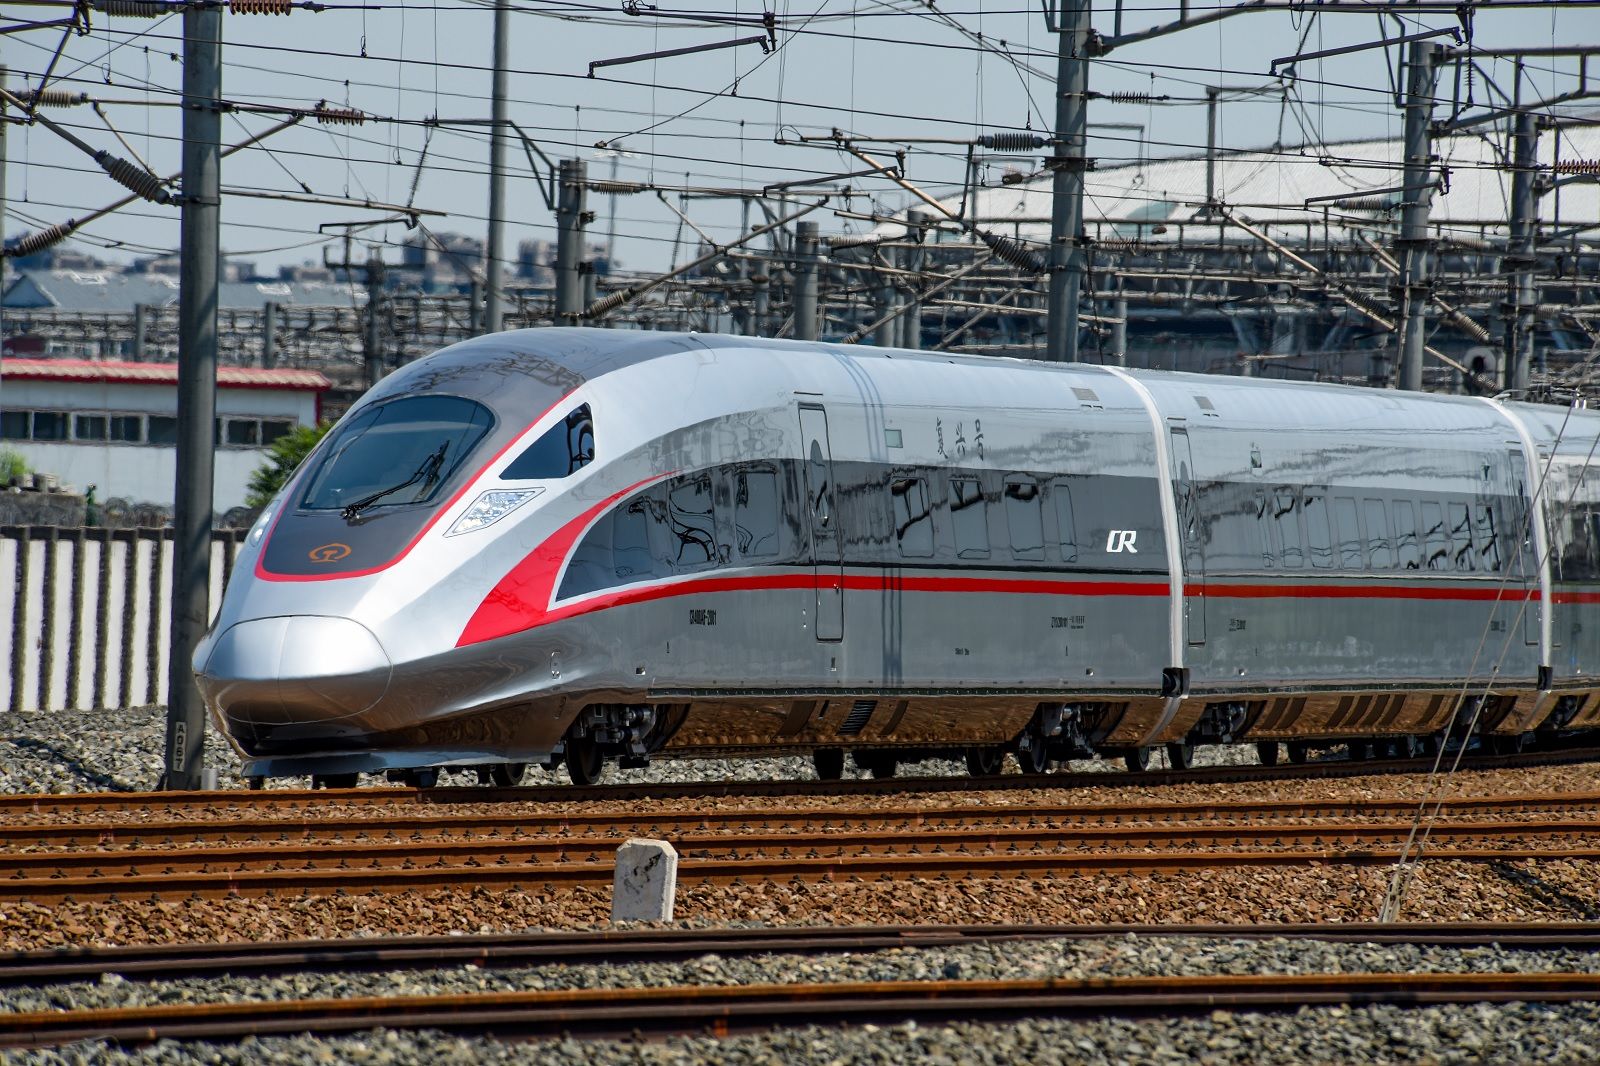 The Fastest Trains Around World Record Breaking Trains image 11